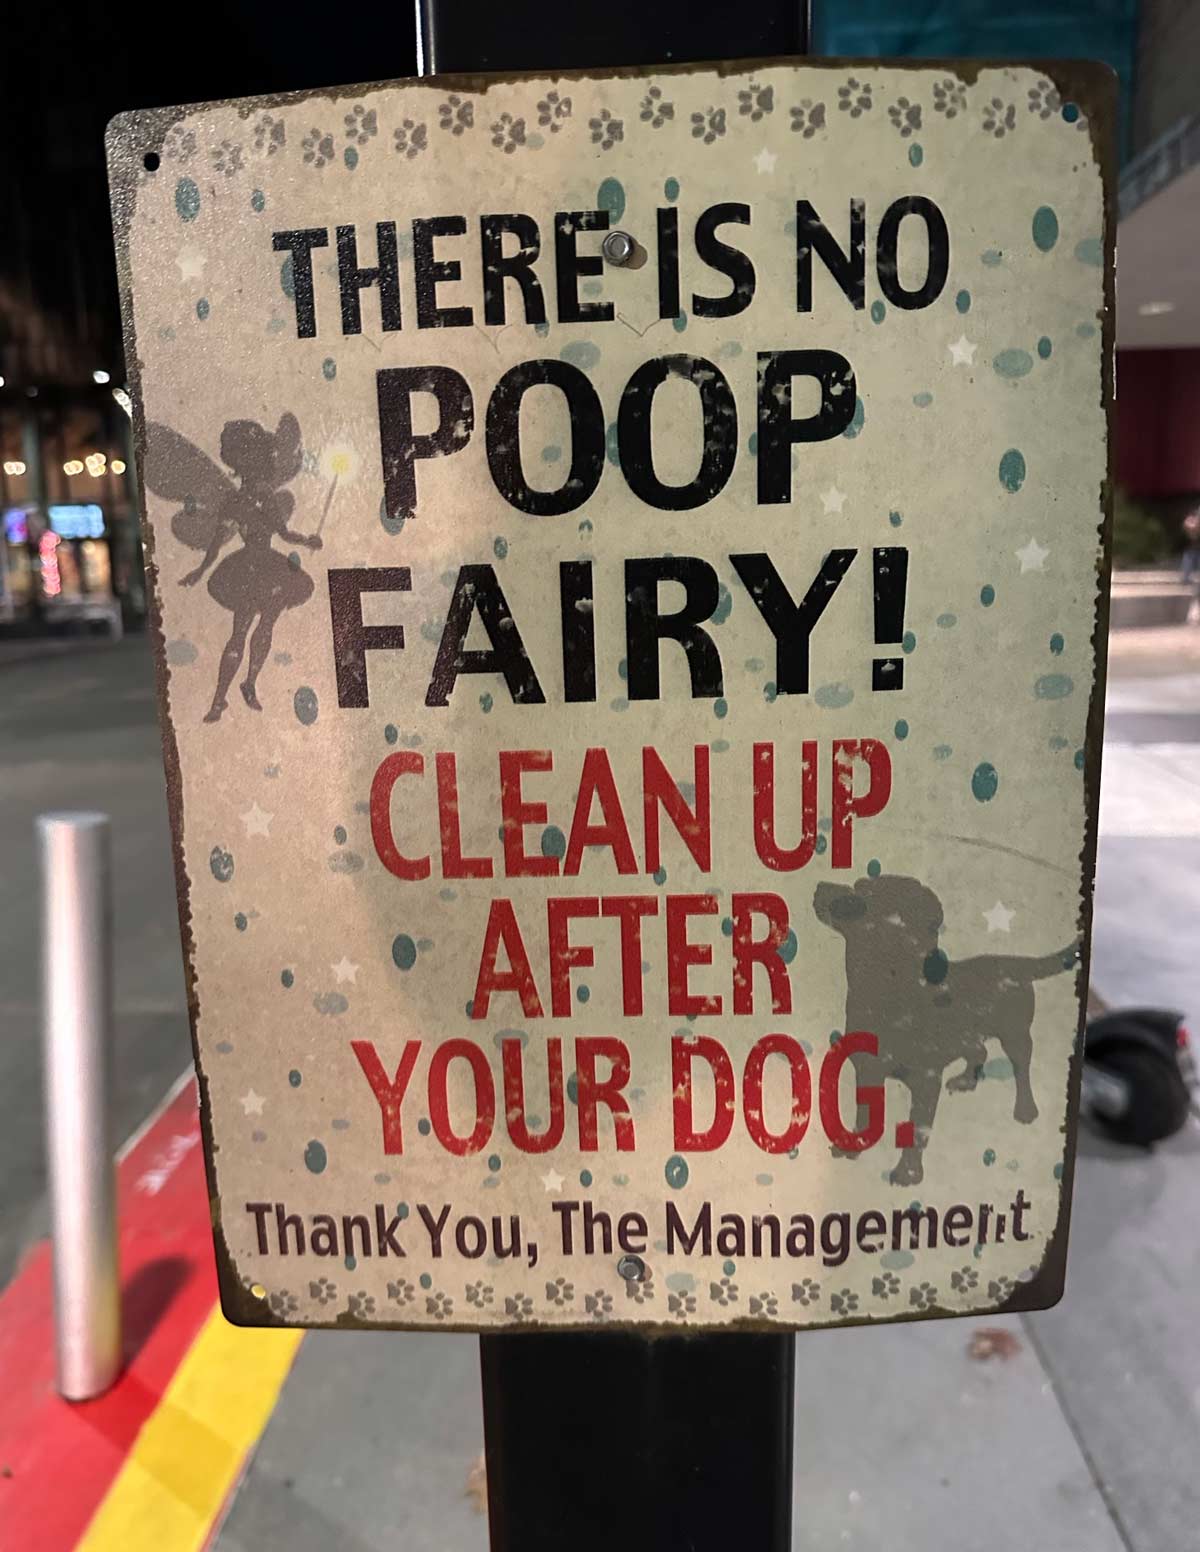 There is no poop fairy. That settles that